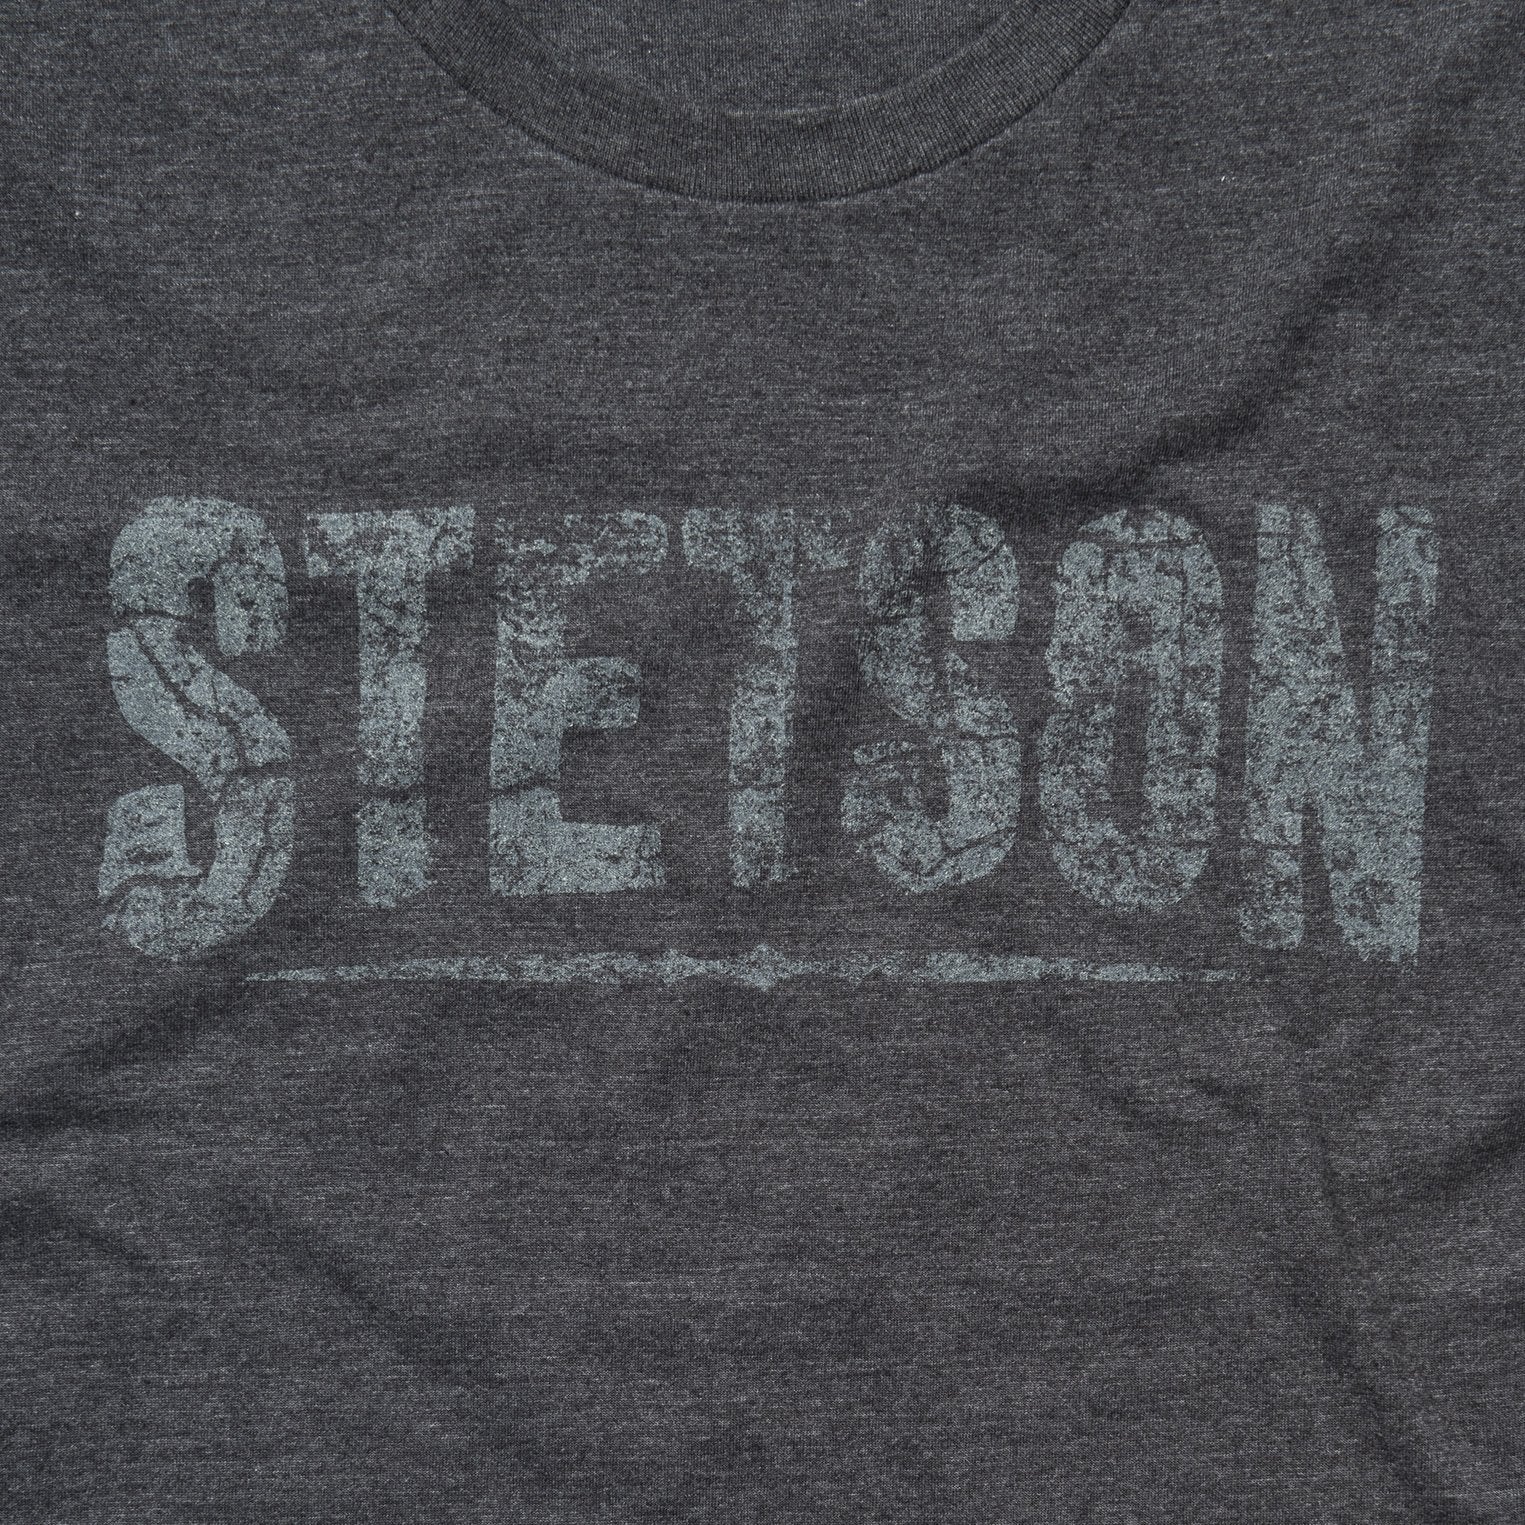 Stetson Distressed Stetson Graphic Tee